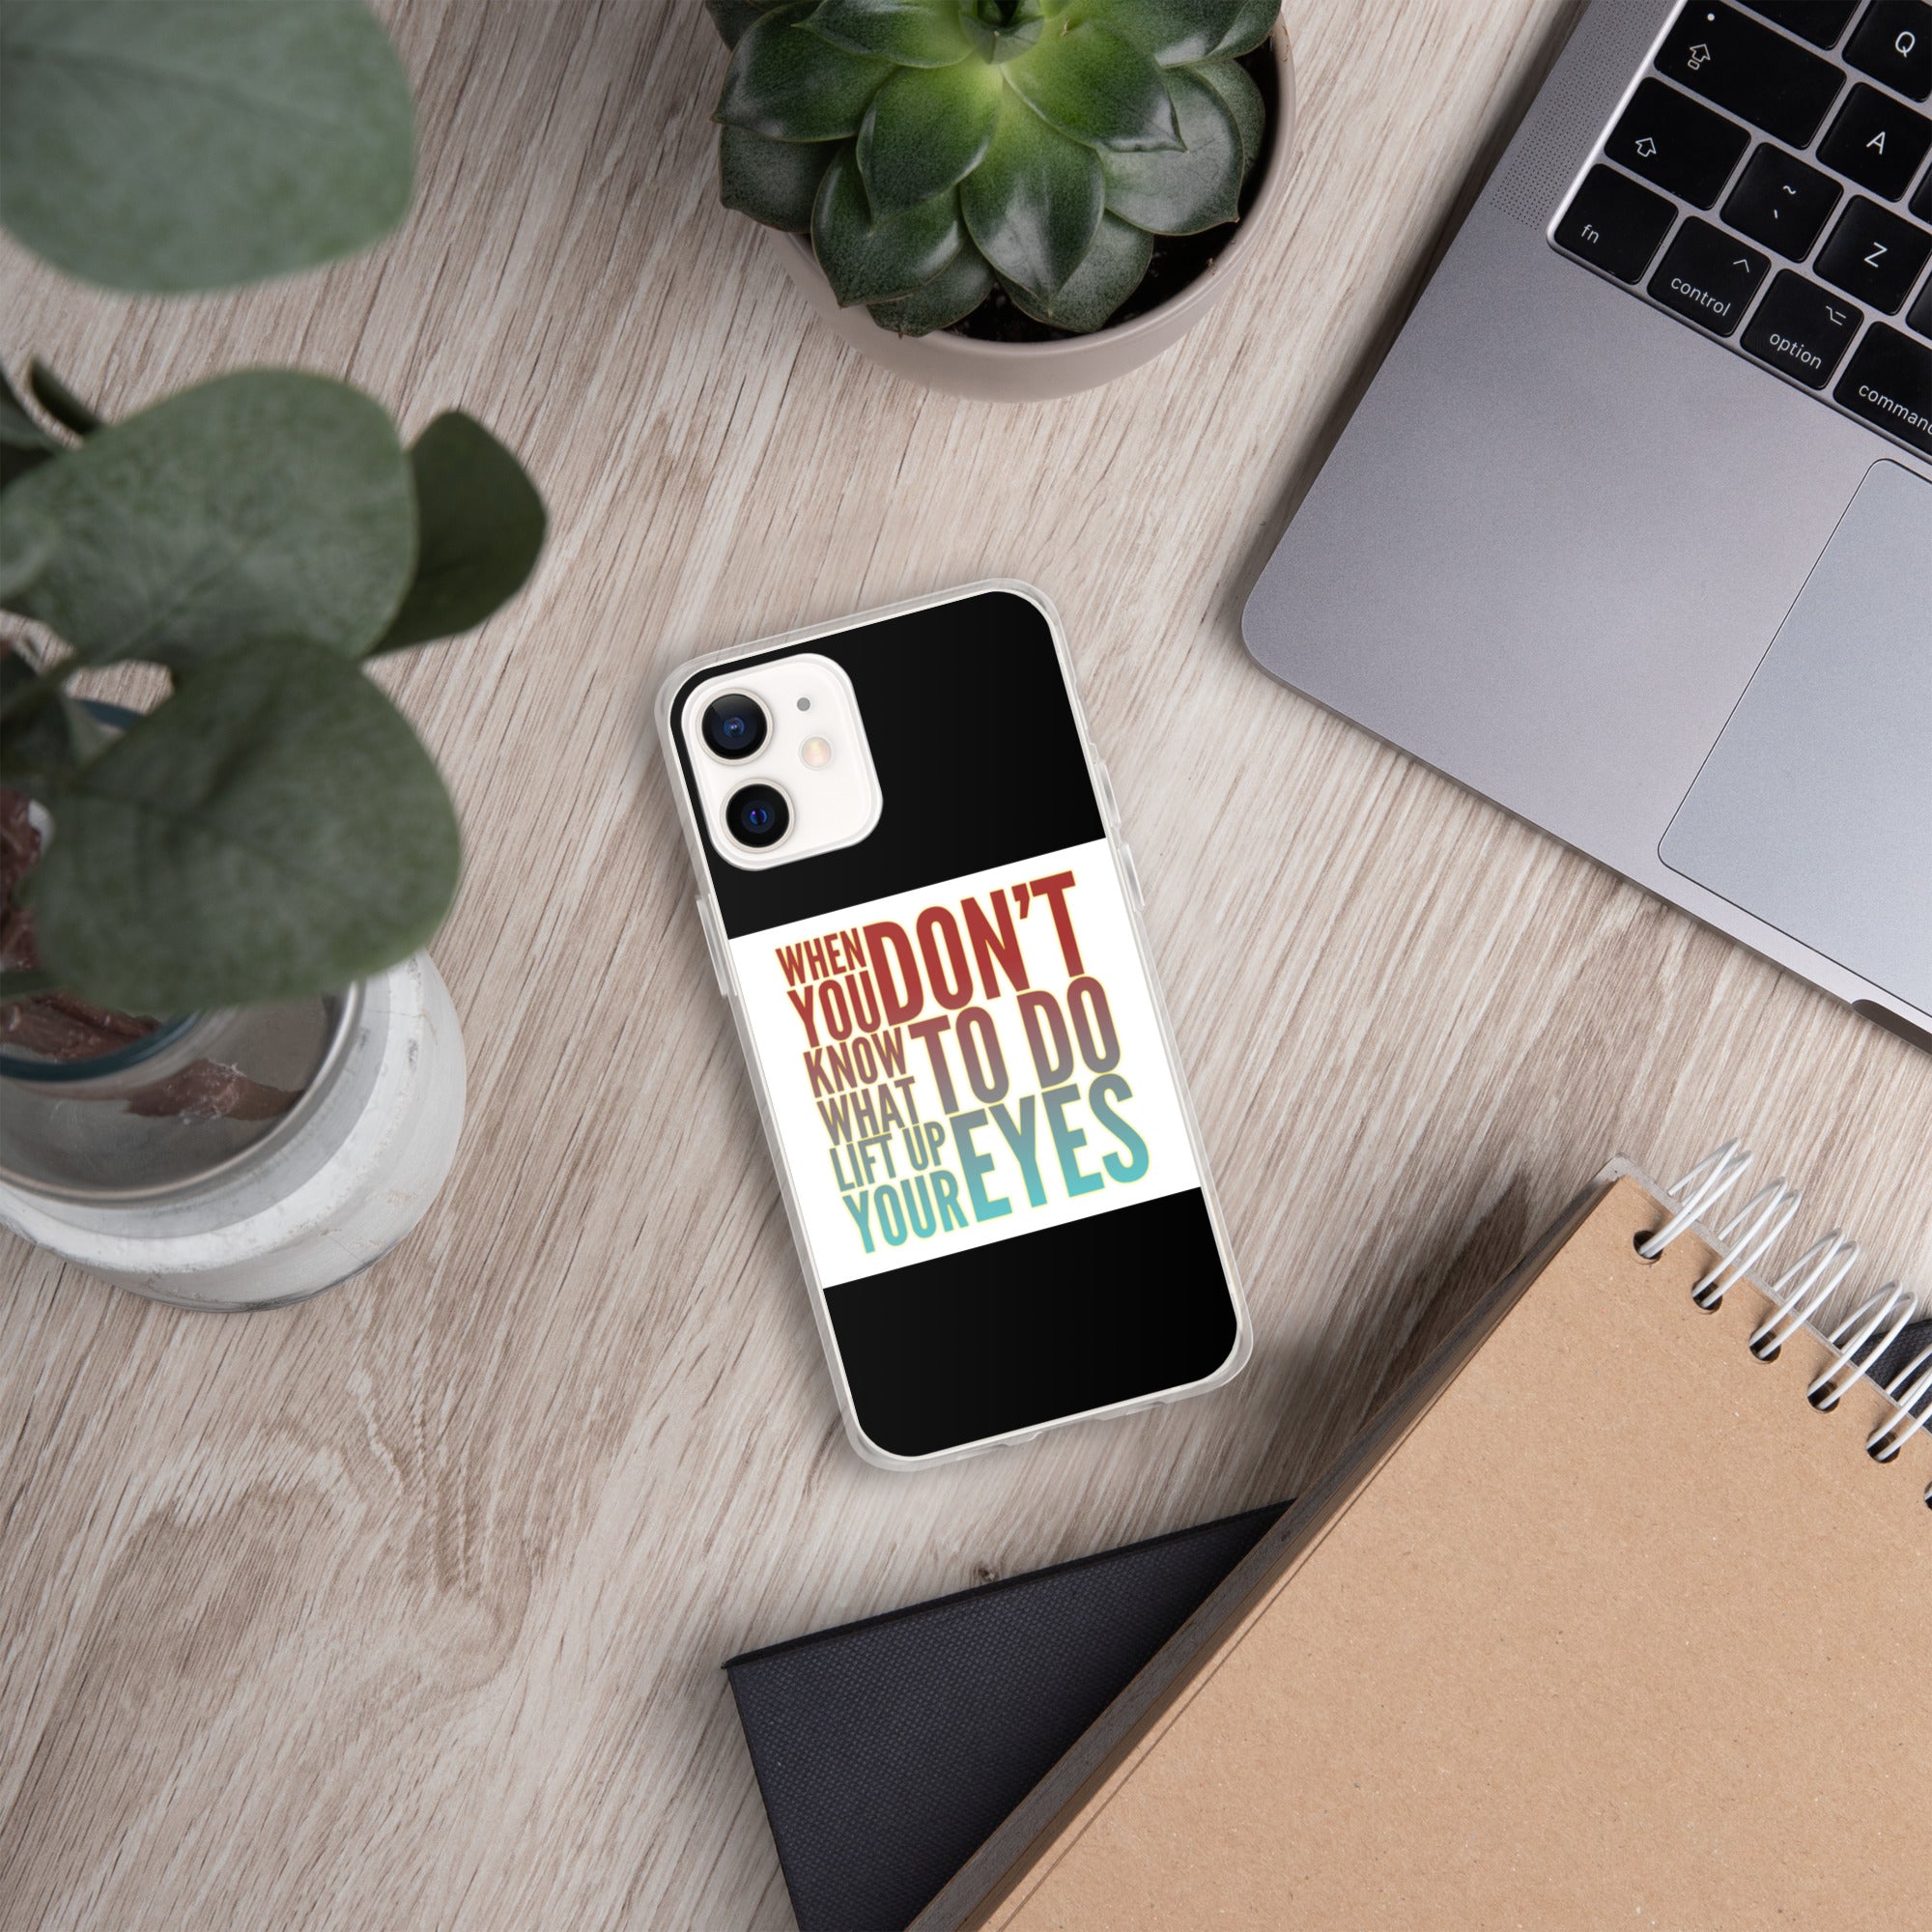 GloWell Designs - iPhone Case - Motivational Quote - Lift Up Your Eyes - GloWell Designs